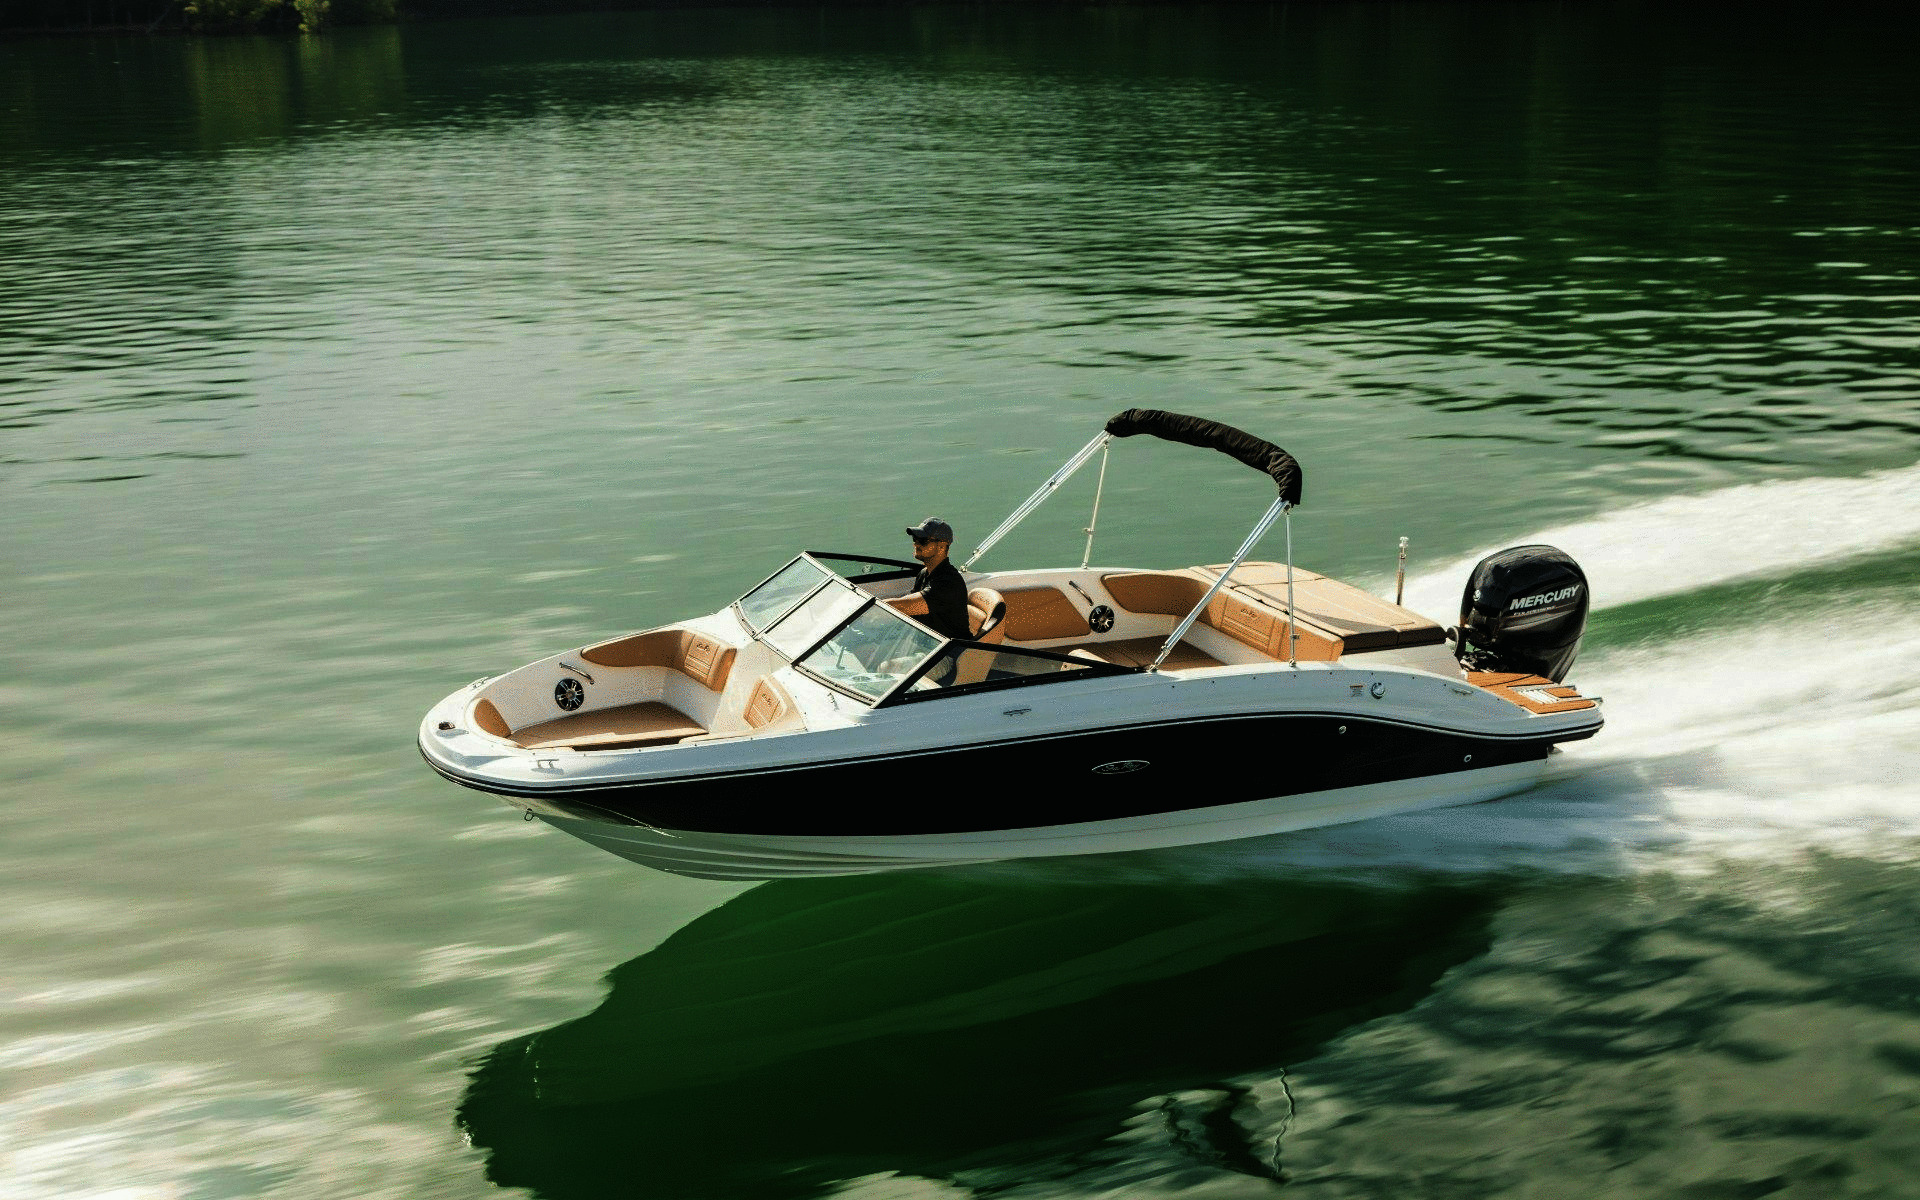 Wanted One (Cruising/WaterSports)